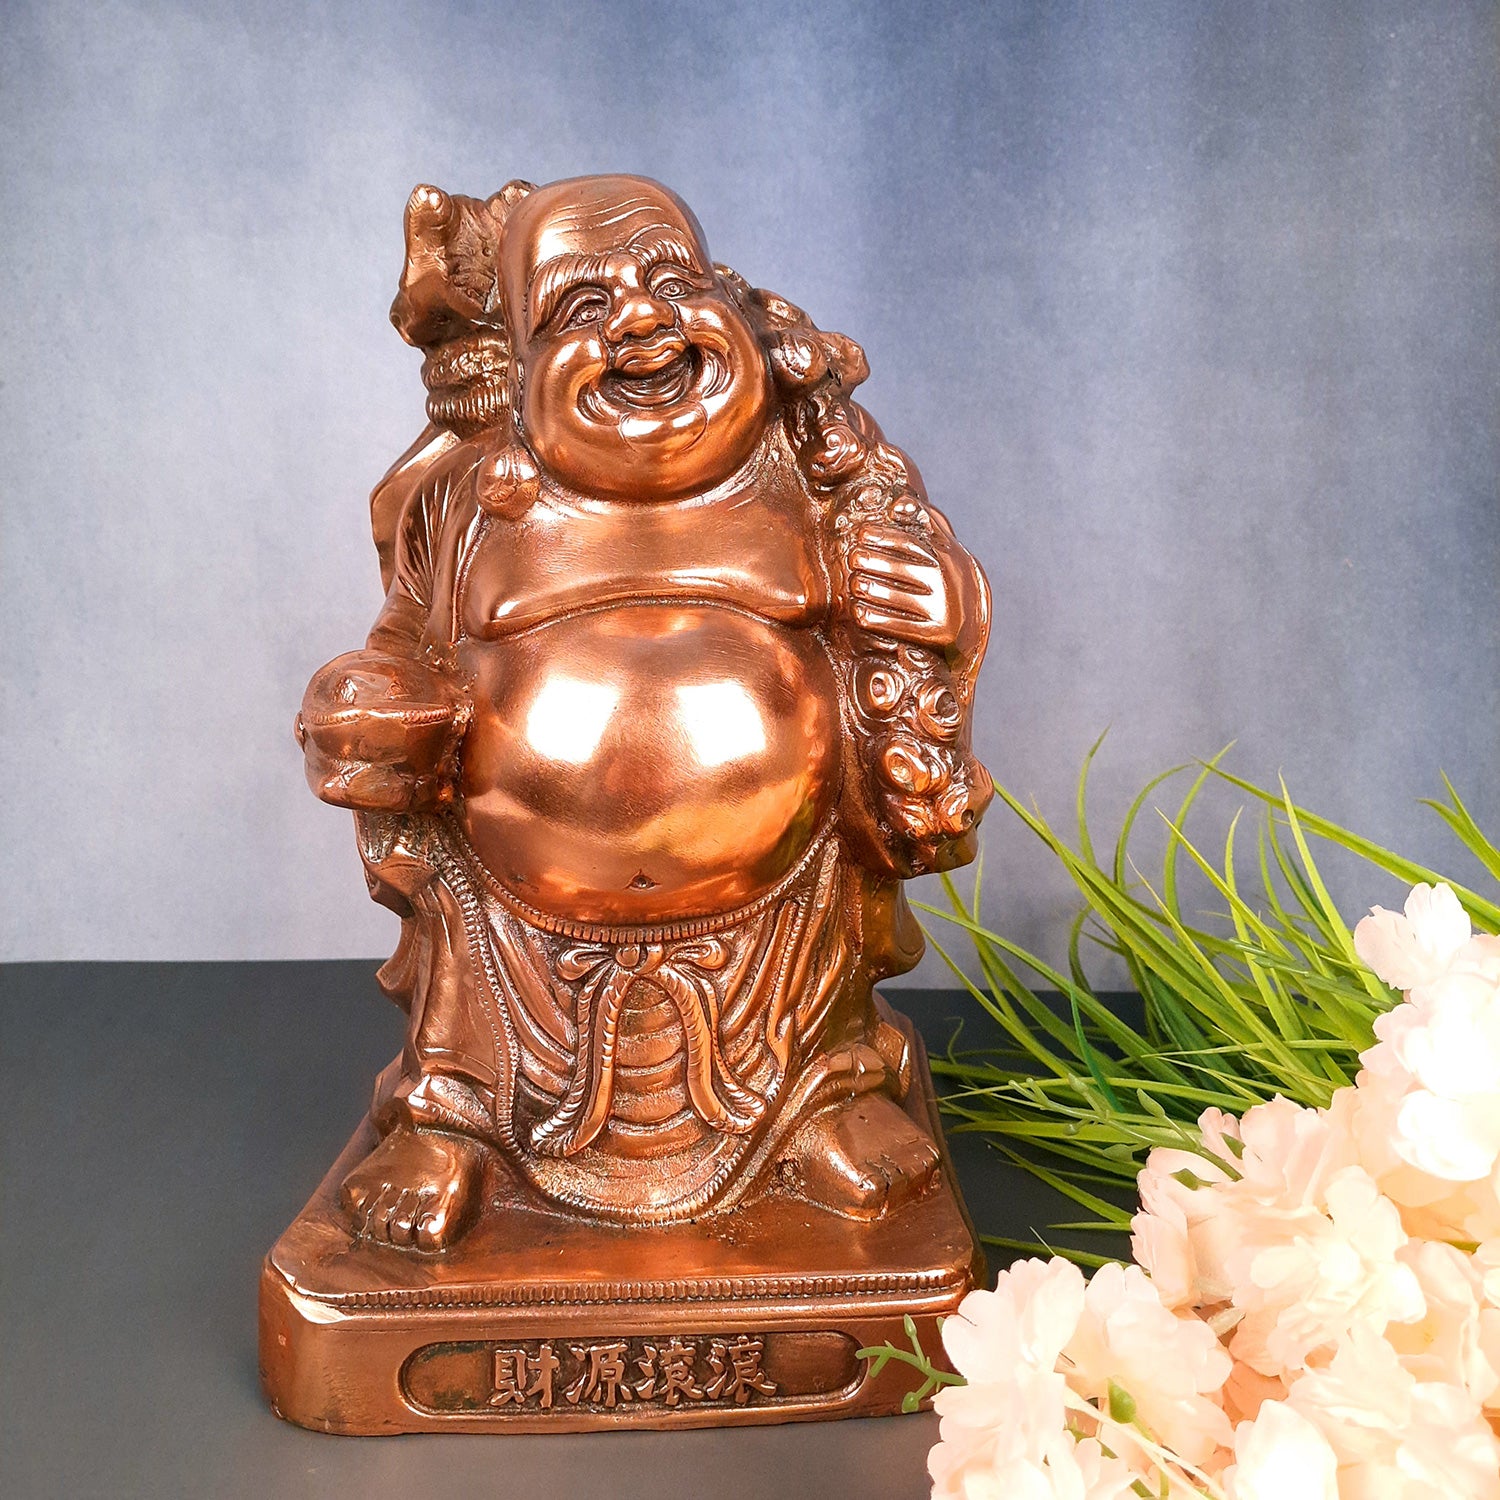 Laughing Buddha Statue | Child Monk Showpiece with Money Bag for Wealth | For Good Luck, Home, Table & Office Decor & Gift - 13 Inch - Apkamart